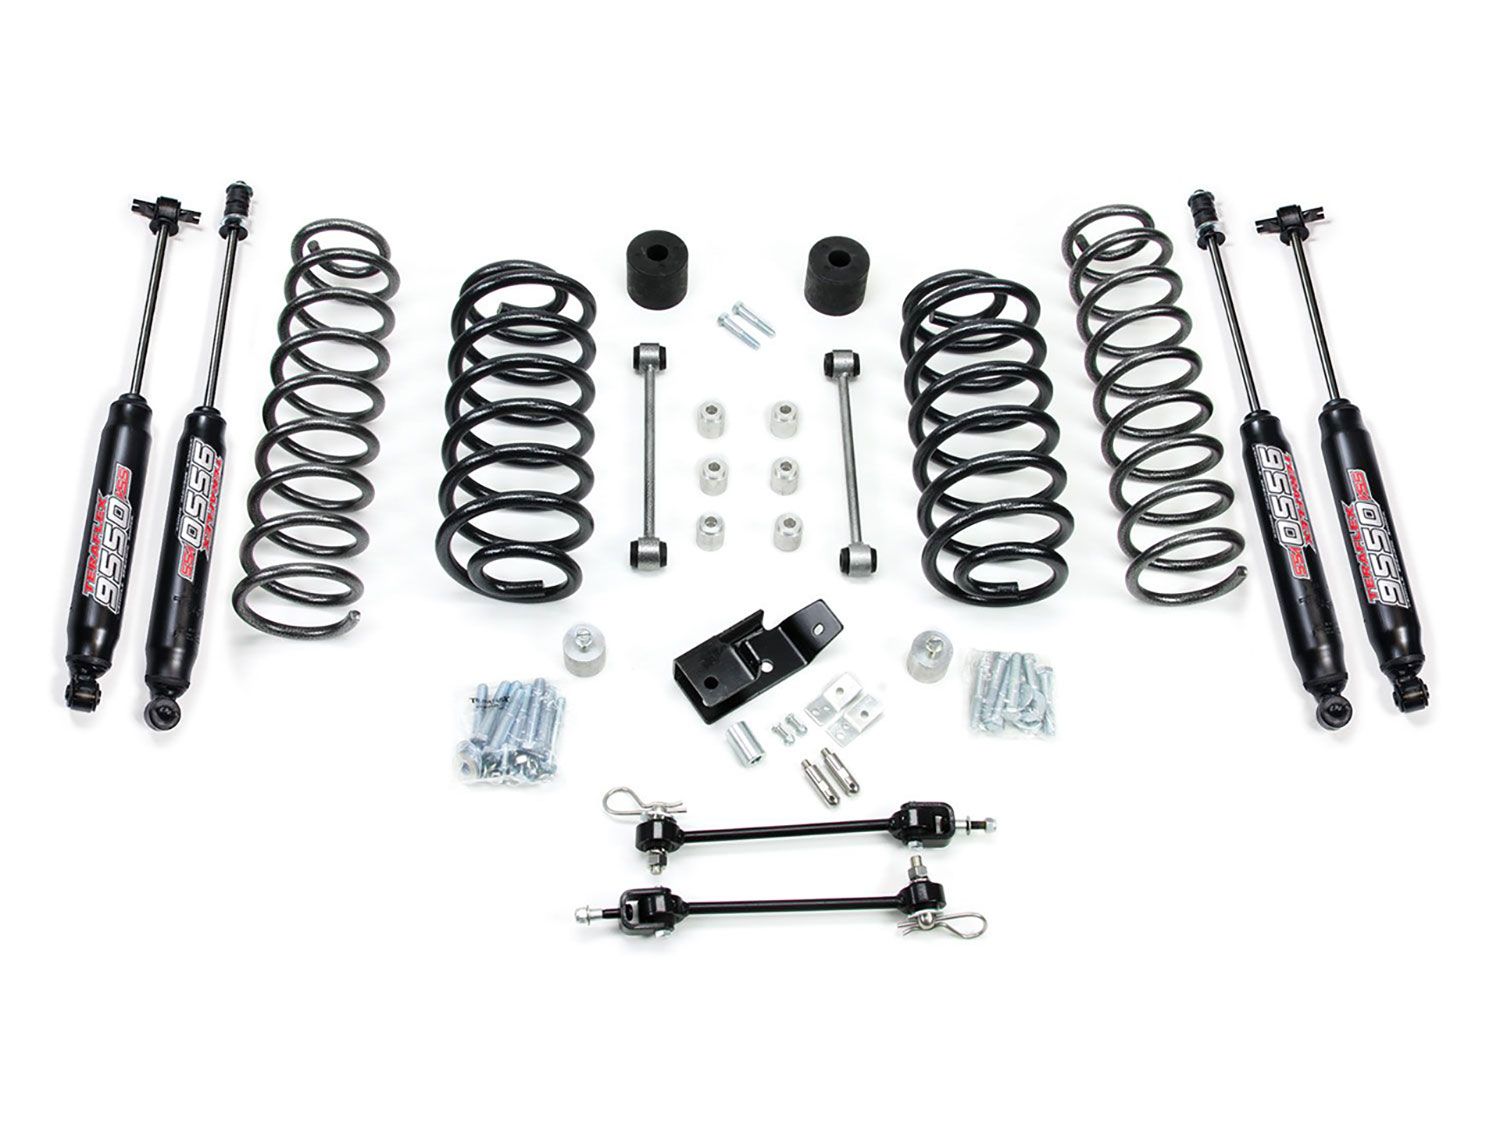 3" 1997-2006 Jeep Wrangler TJ Coil Spring Lift Kit (w/quick disconnects) by Teraflex